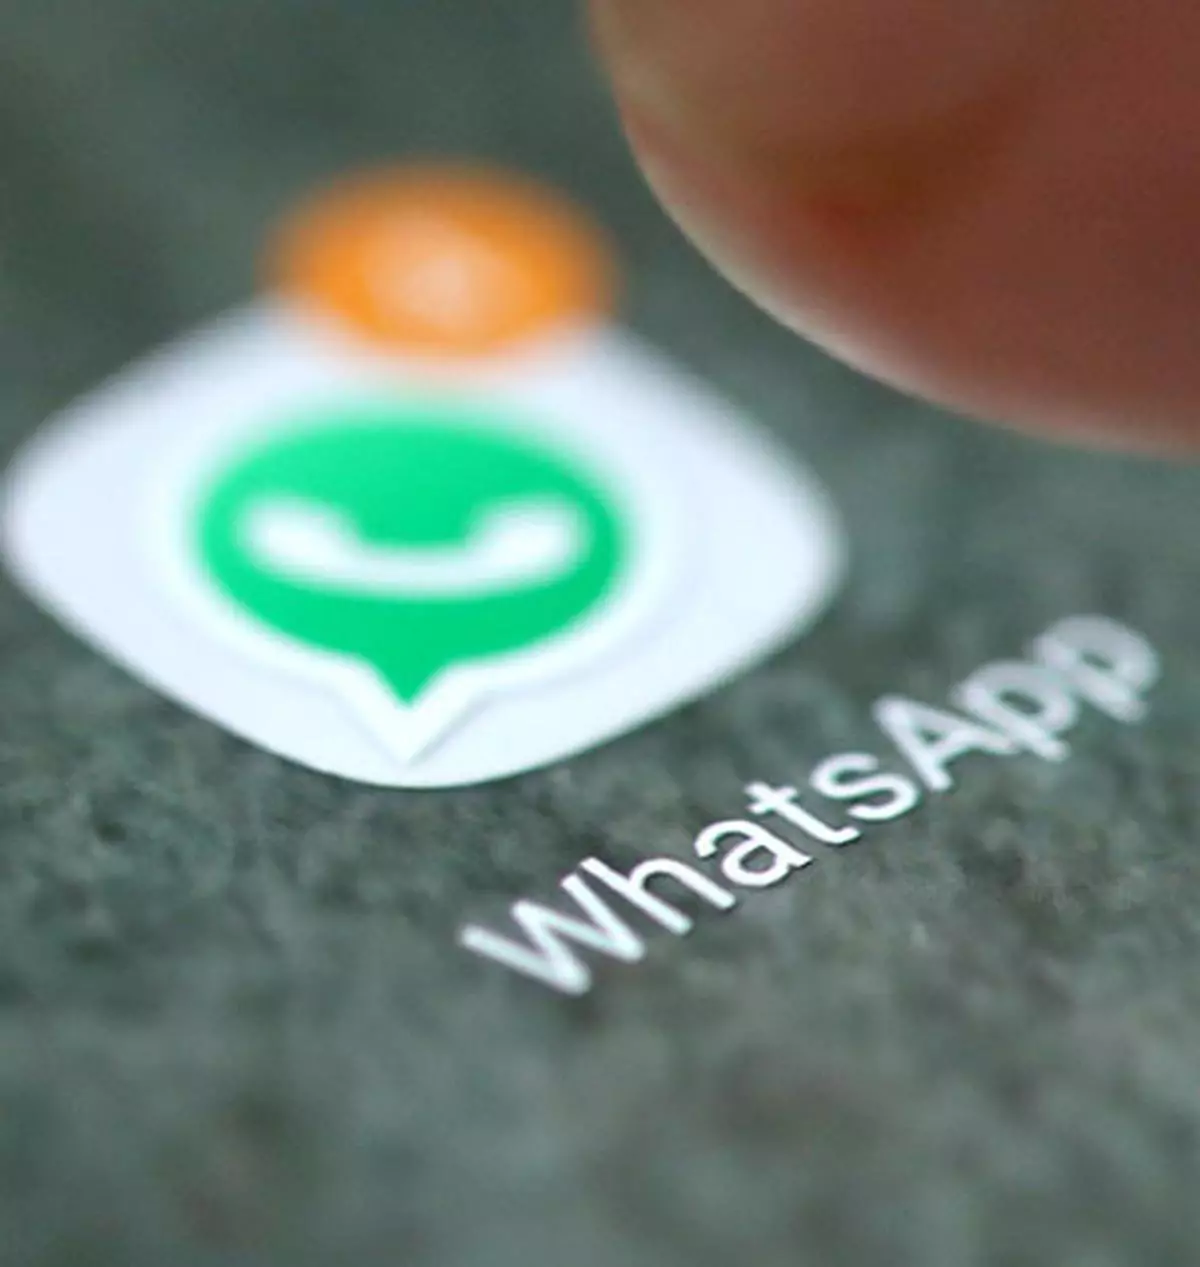 WhatsApp has a new privacy feature